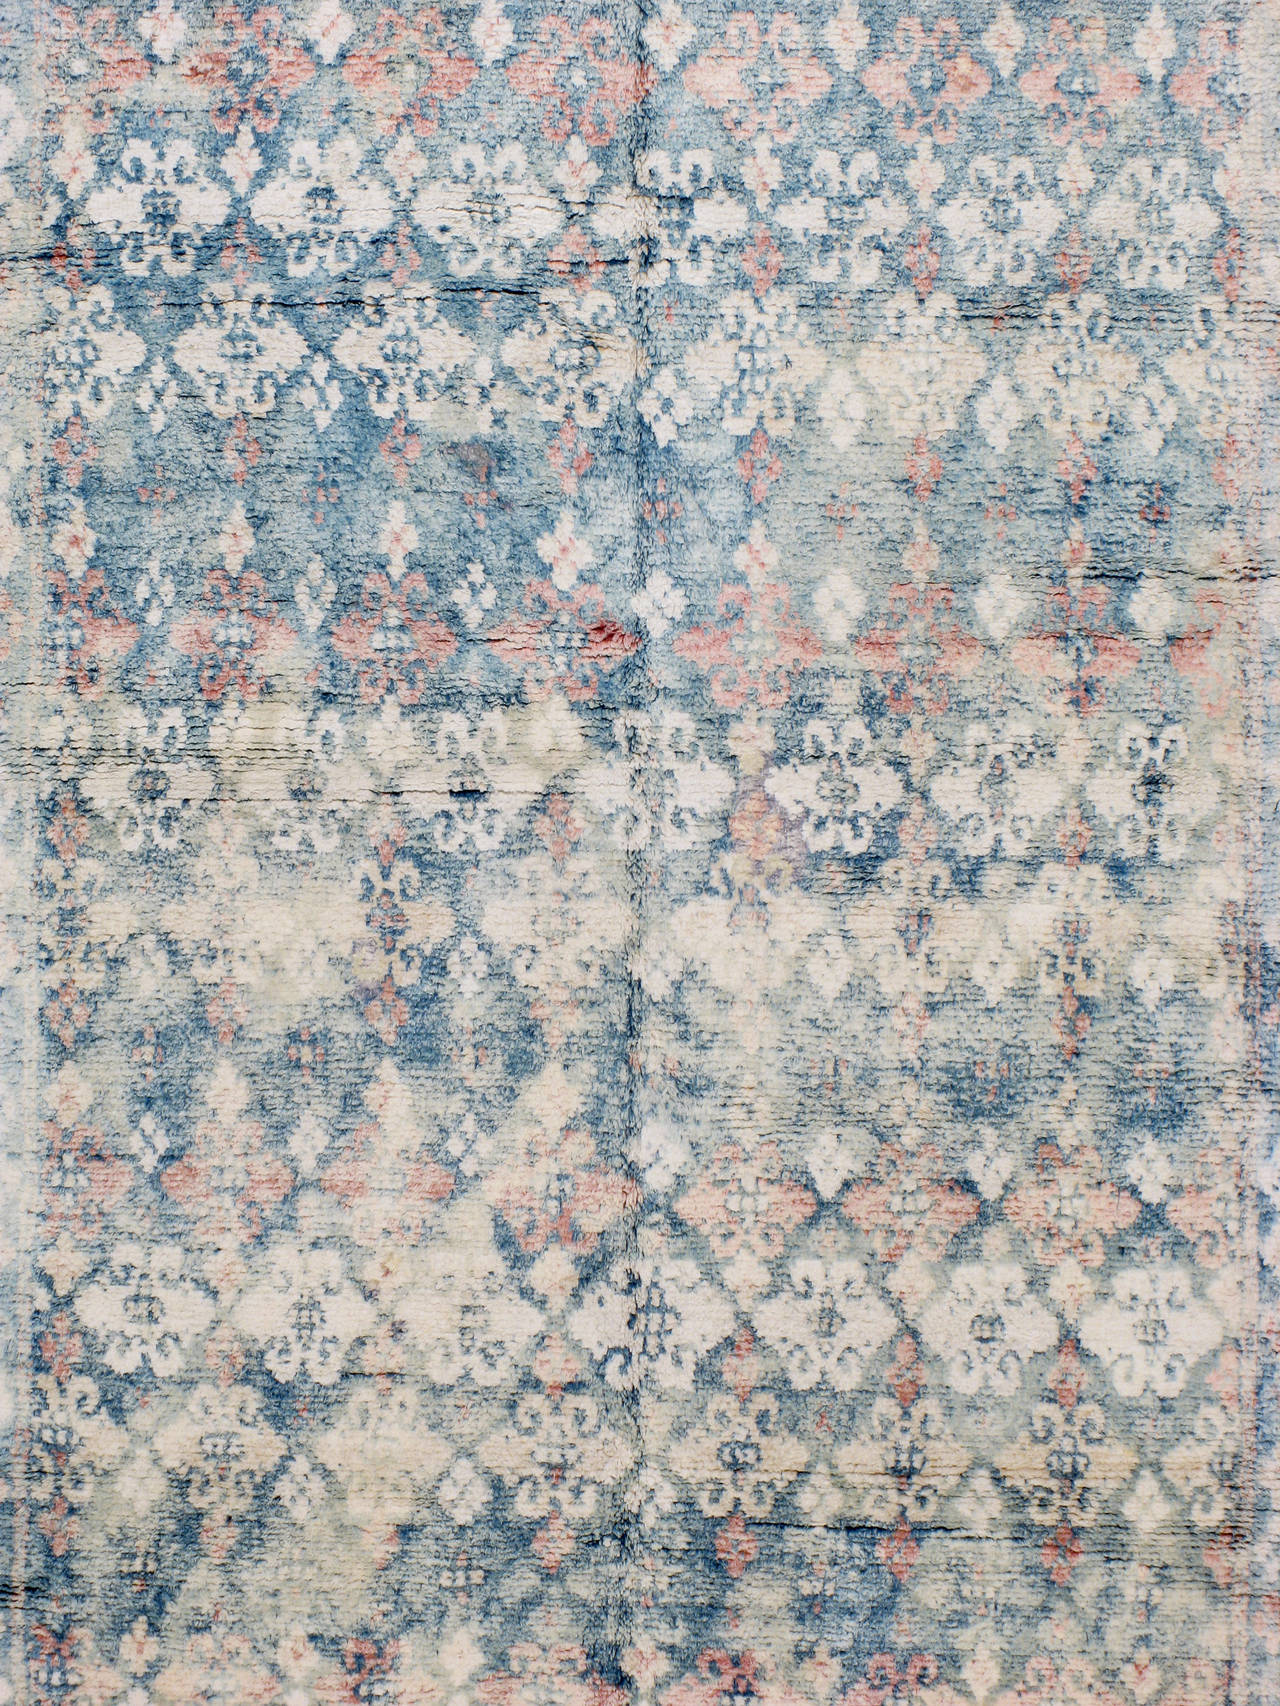 An antique Indian cotton Agra carpet from the second quarter of the 20th century.